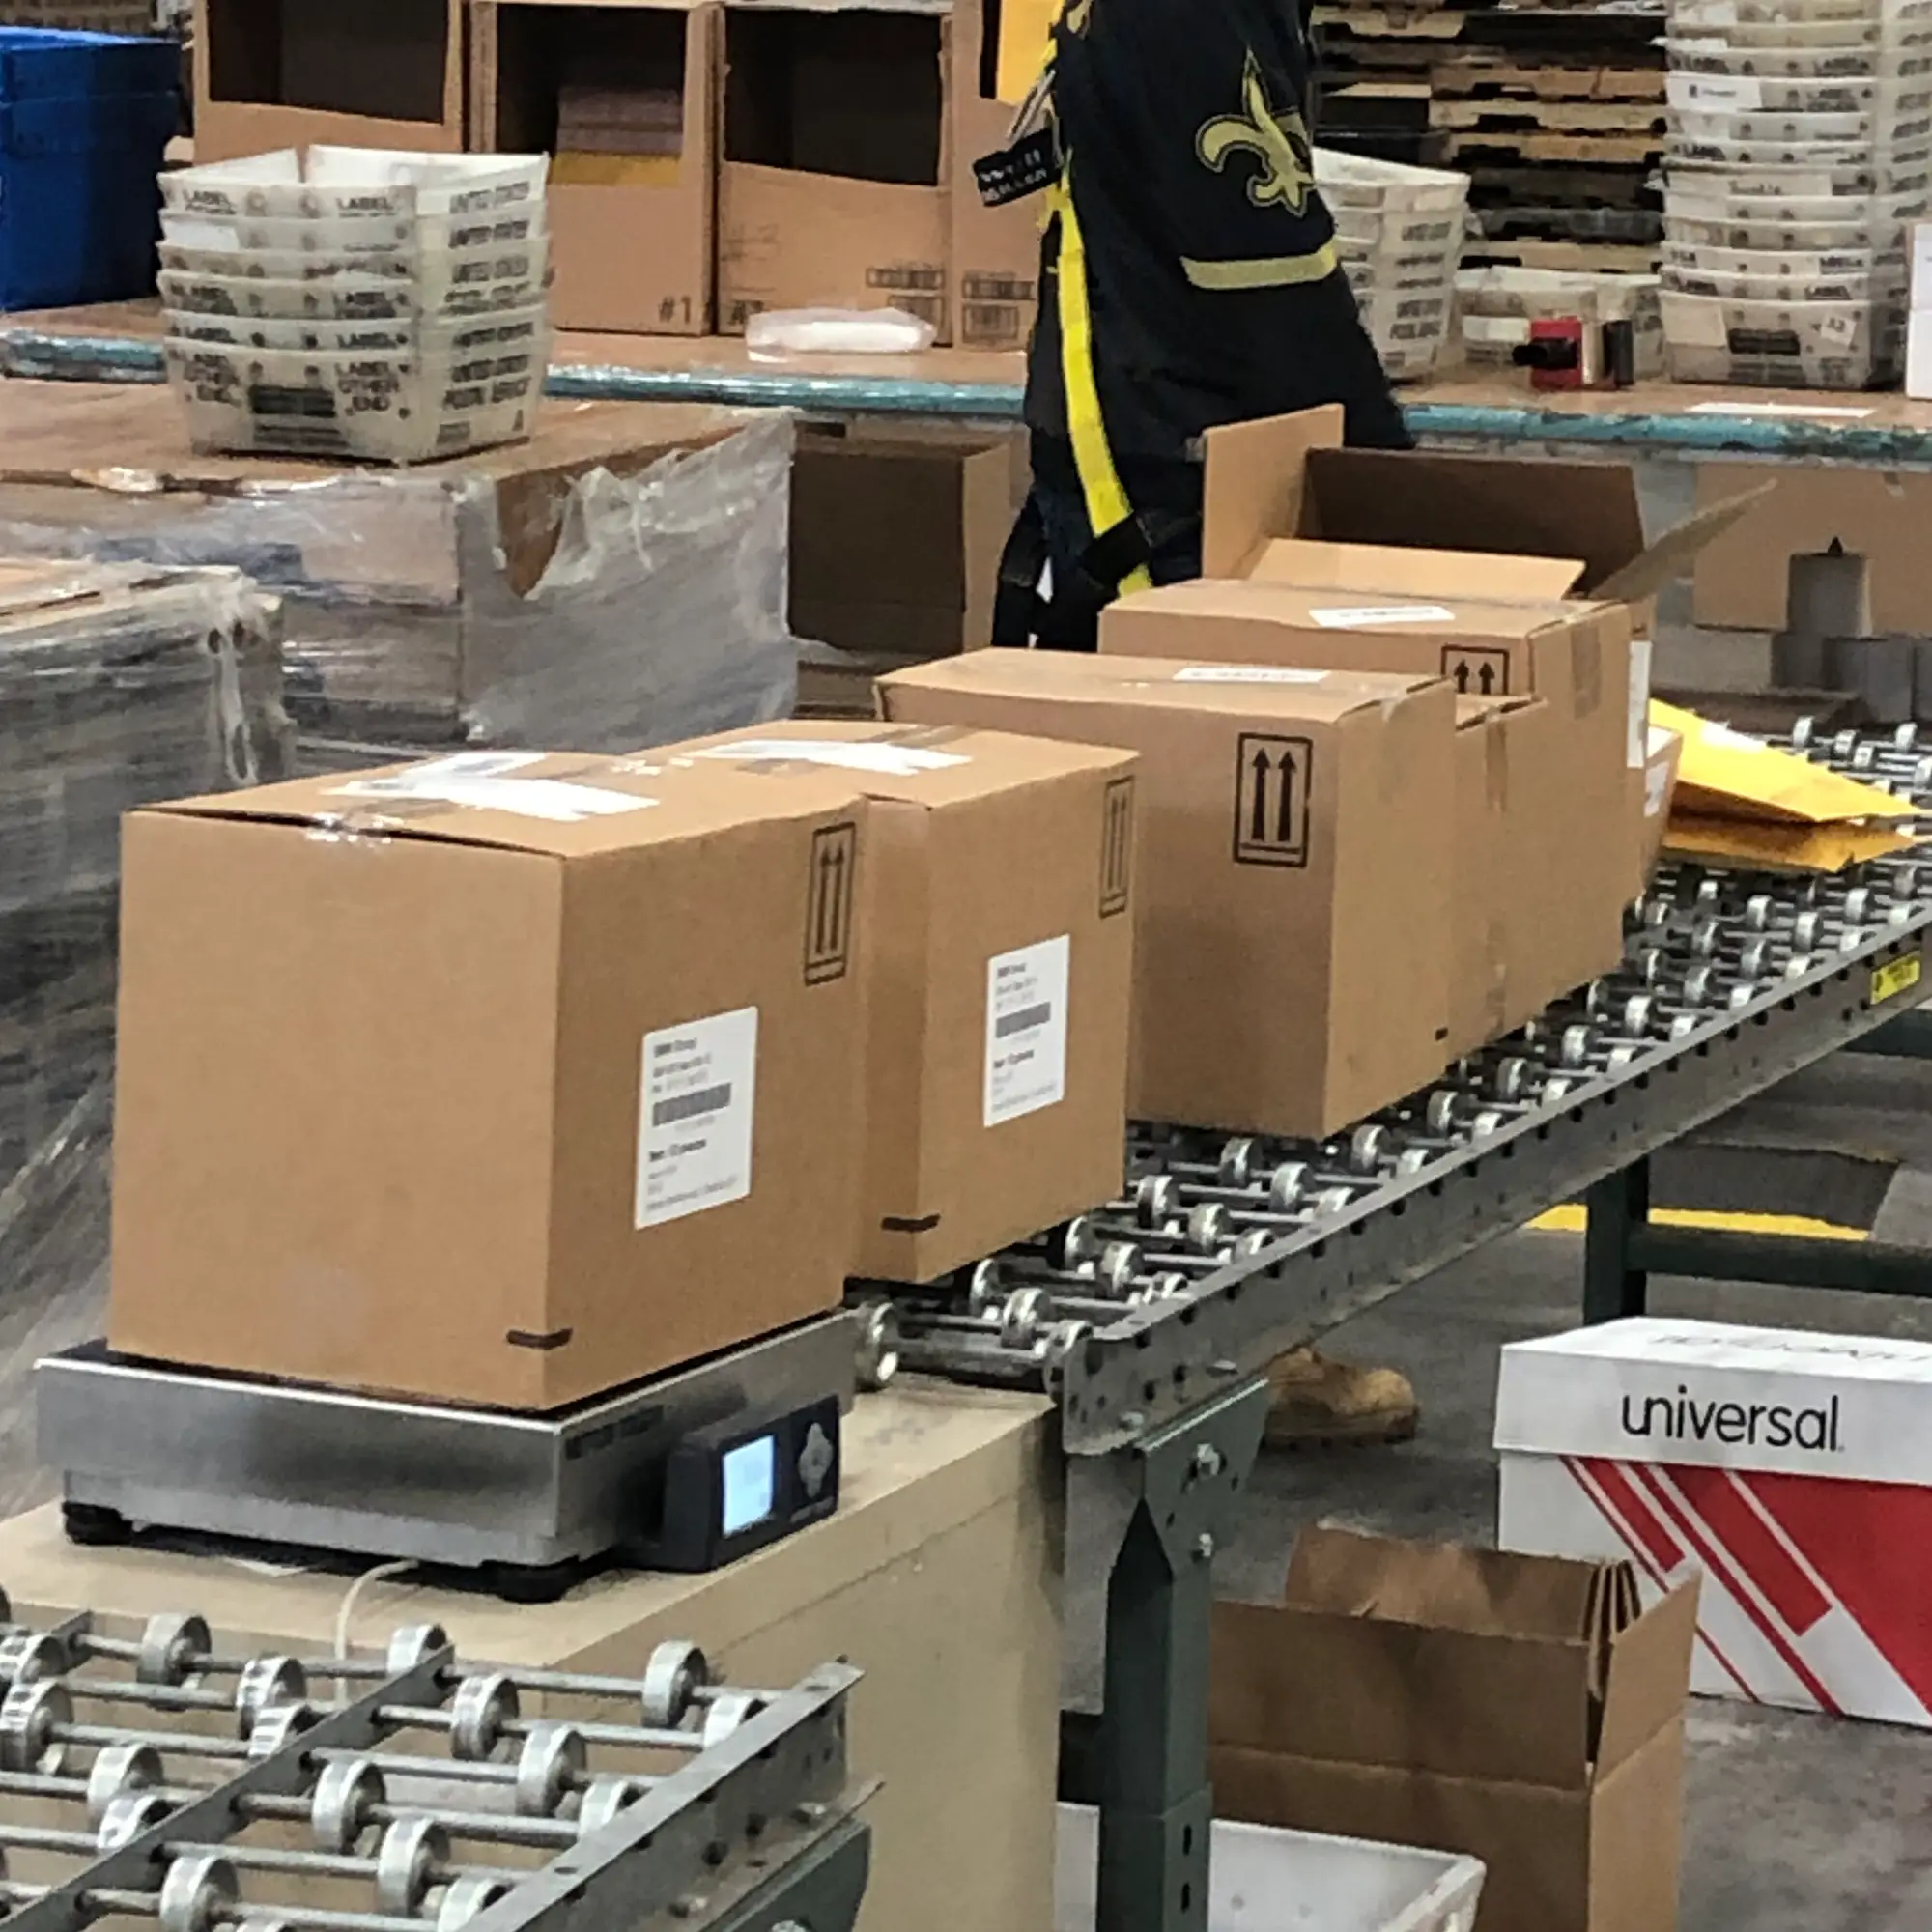 Boxes on a conveyor belt in a warehouse, with an employee in the background wearing a black and yellow shirt, diligently picking items to streamline the fulfillment process.